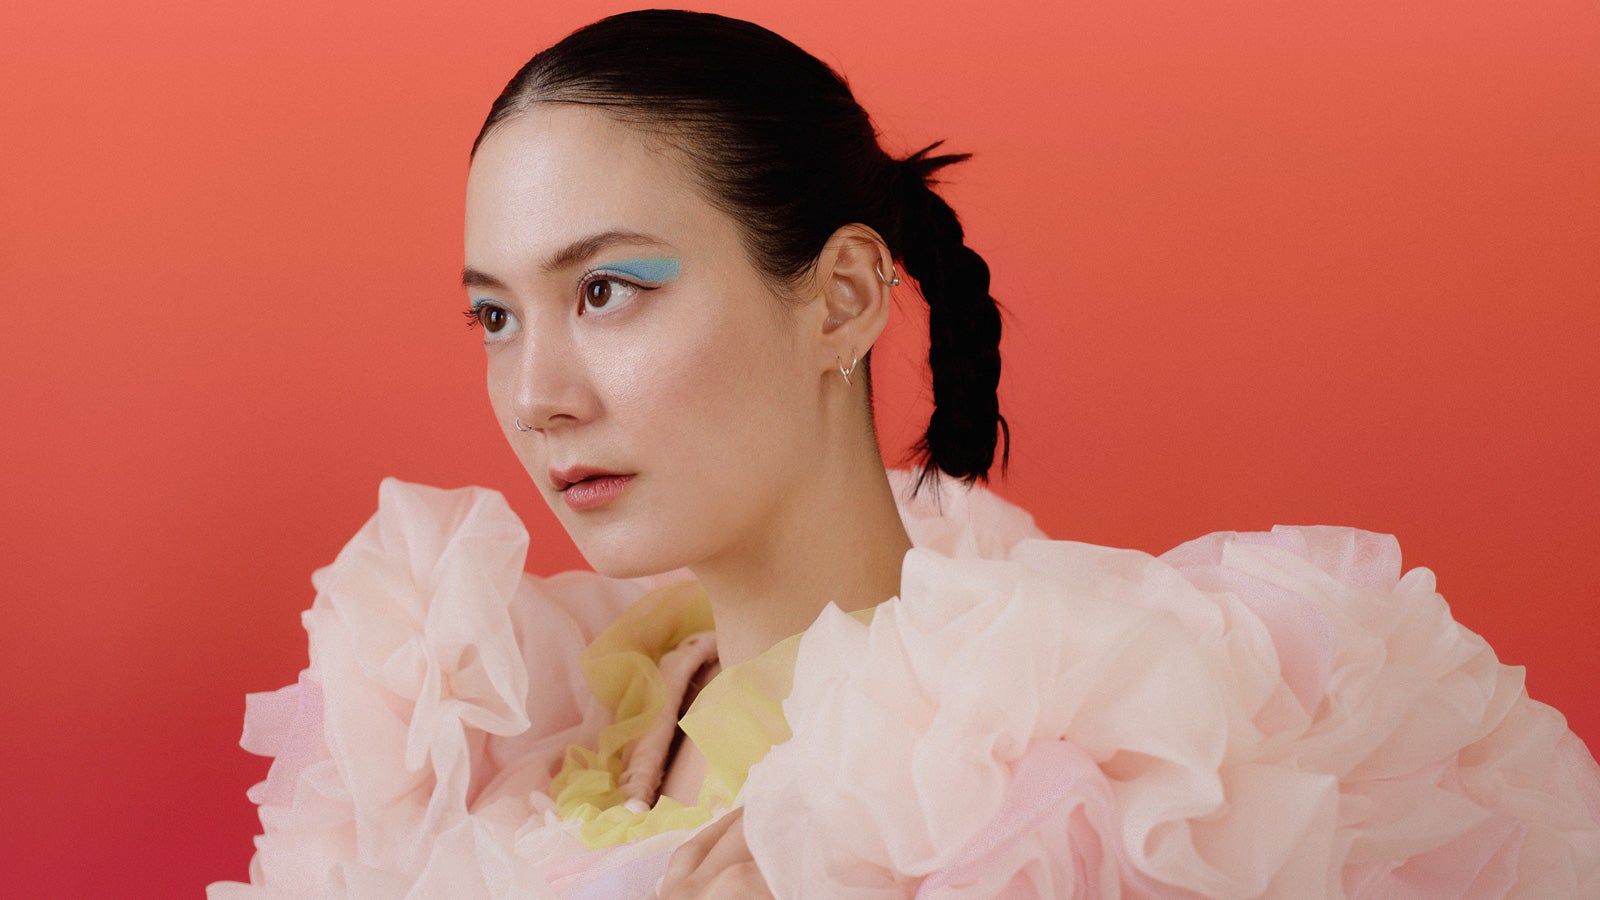 Michelle Zauner wears an oversized pink ruffled top and bright blue eye shadow, looking away from camera in front of a red/orange backdrop